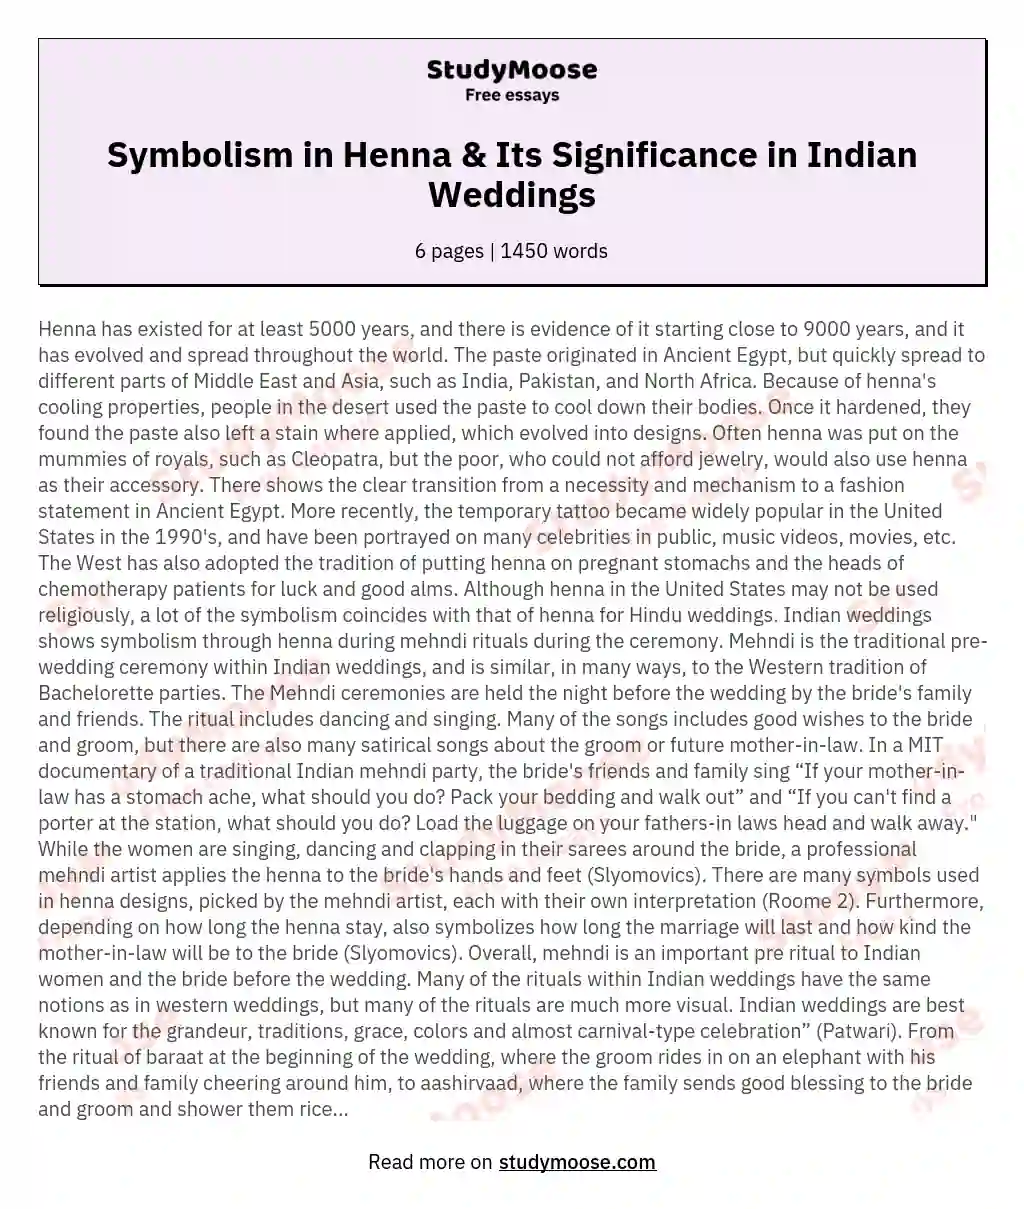 Symbolism in Henna & Its Significance in Indian Weddings essay